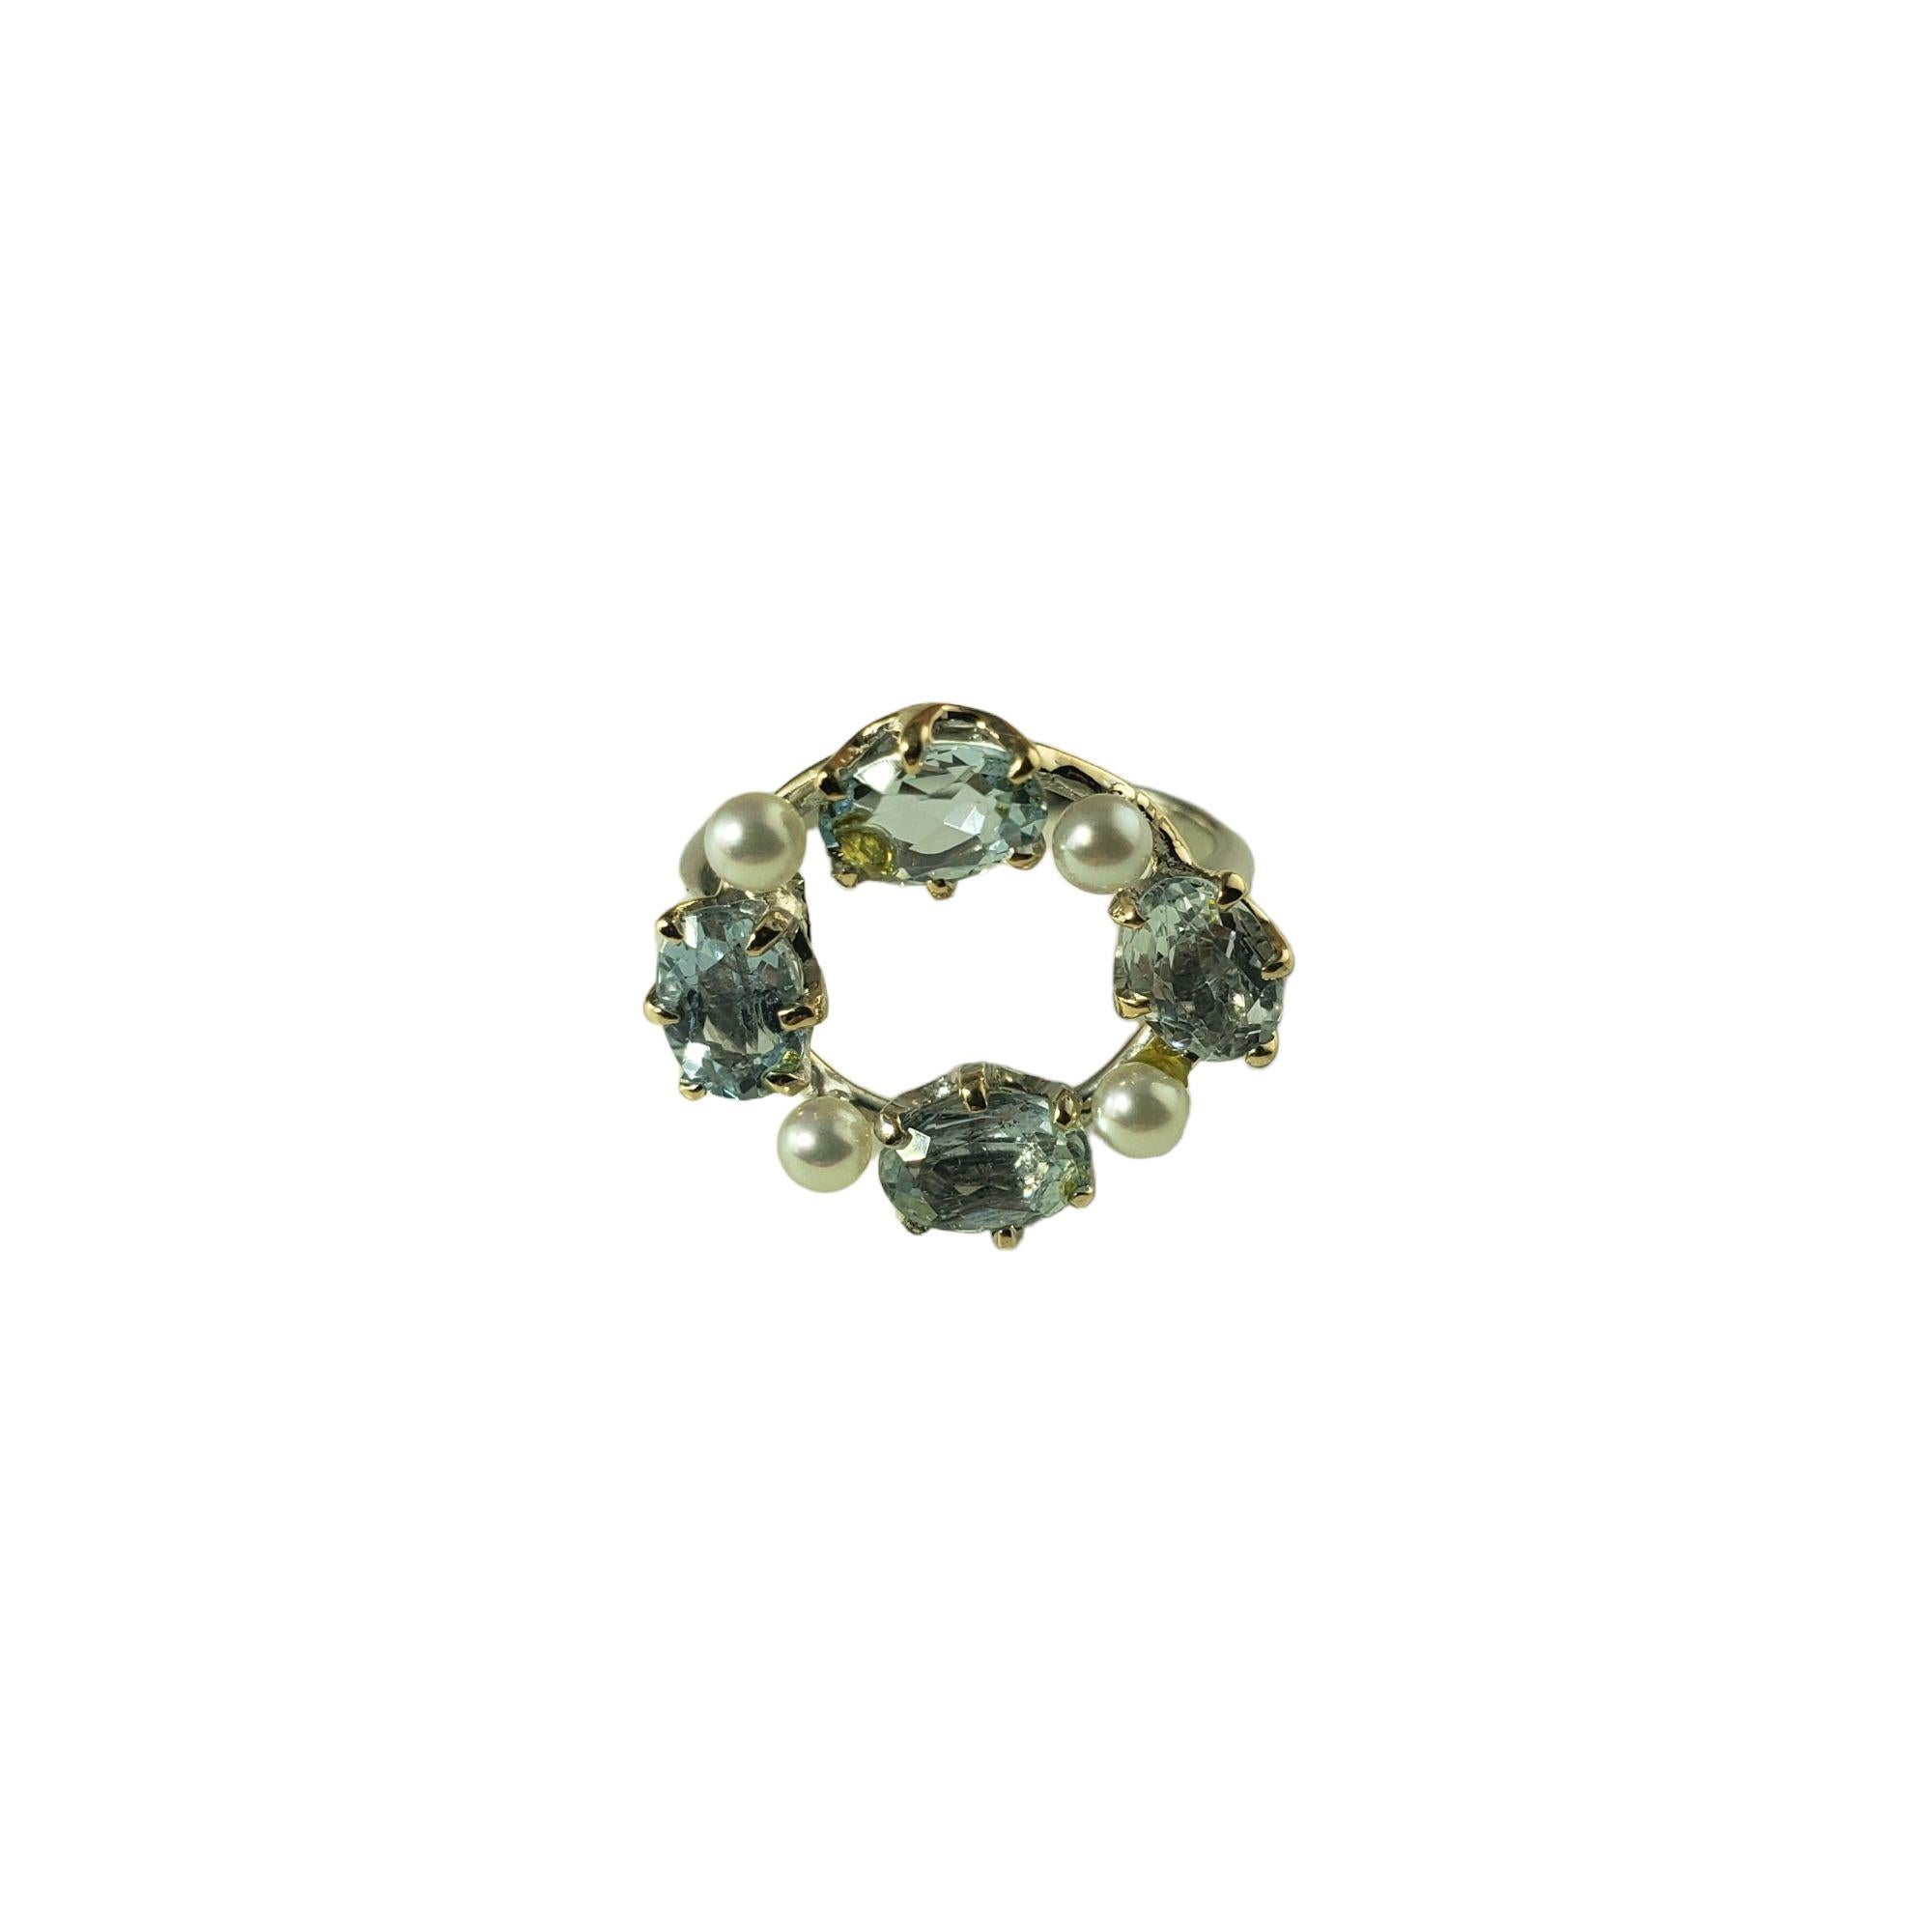 Vintage 14 Karat White Gold Topaz and Diamond Ring Size 3.25 JAGi Certified-

This elegant ring features four oval blue topaz stones and four white cultured pearls set in classic 14K white gold.  Width:  15 mm.

Shank:  1 mm.

Total topaz weight: